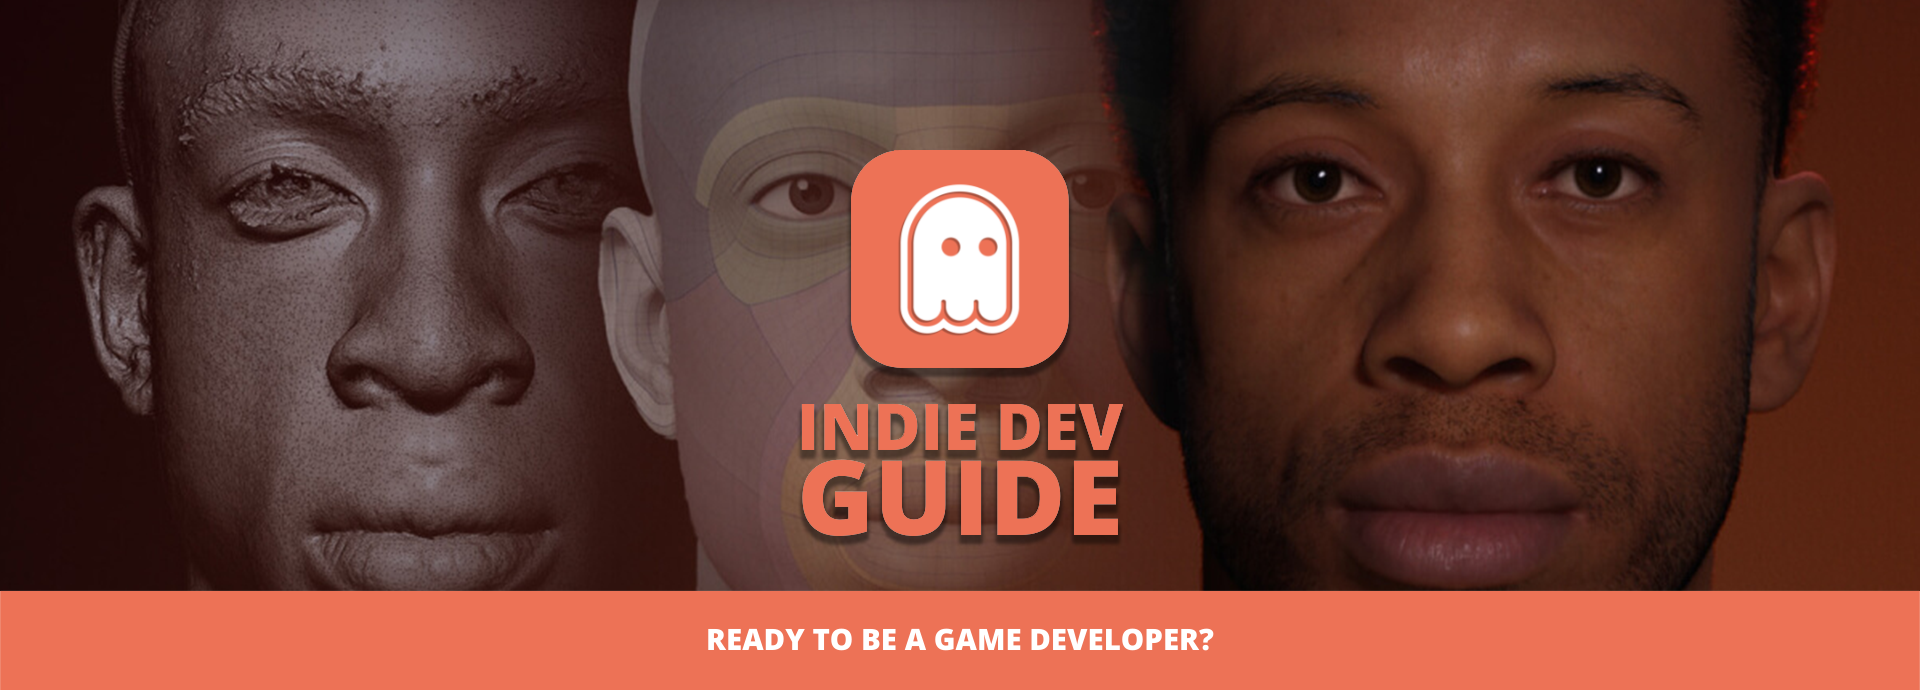 Ready To Be A Game Developer?